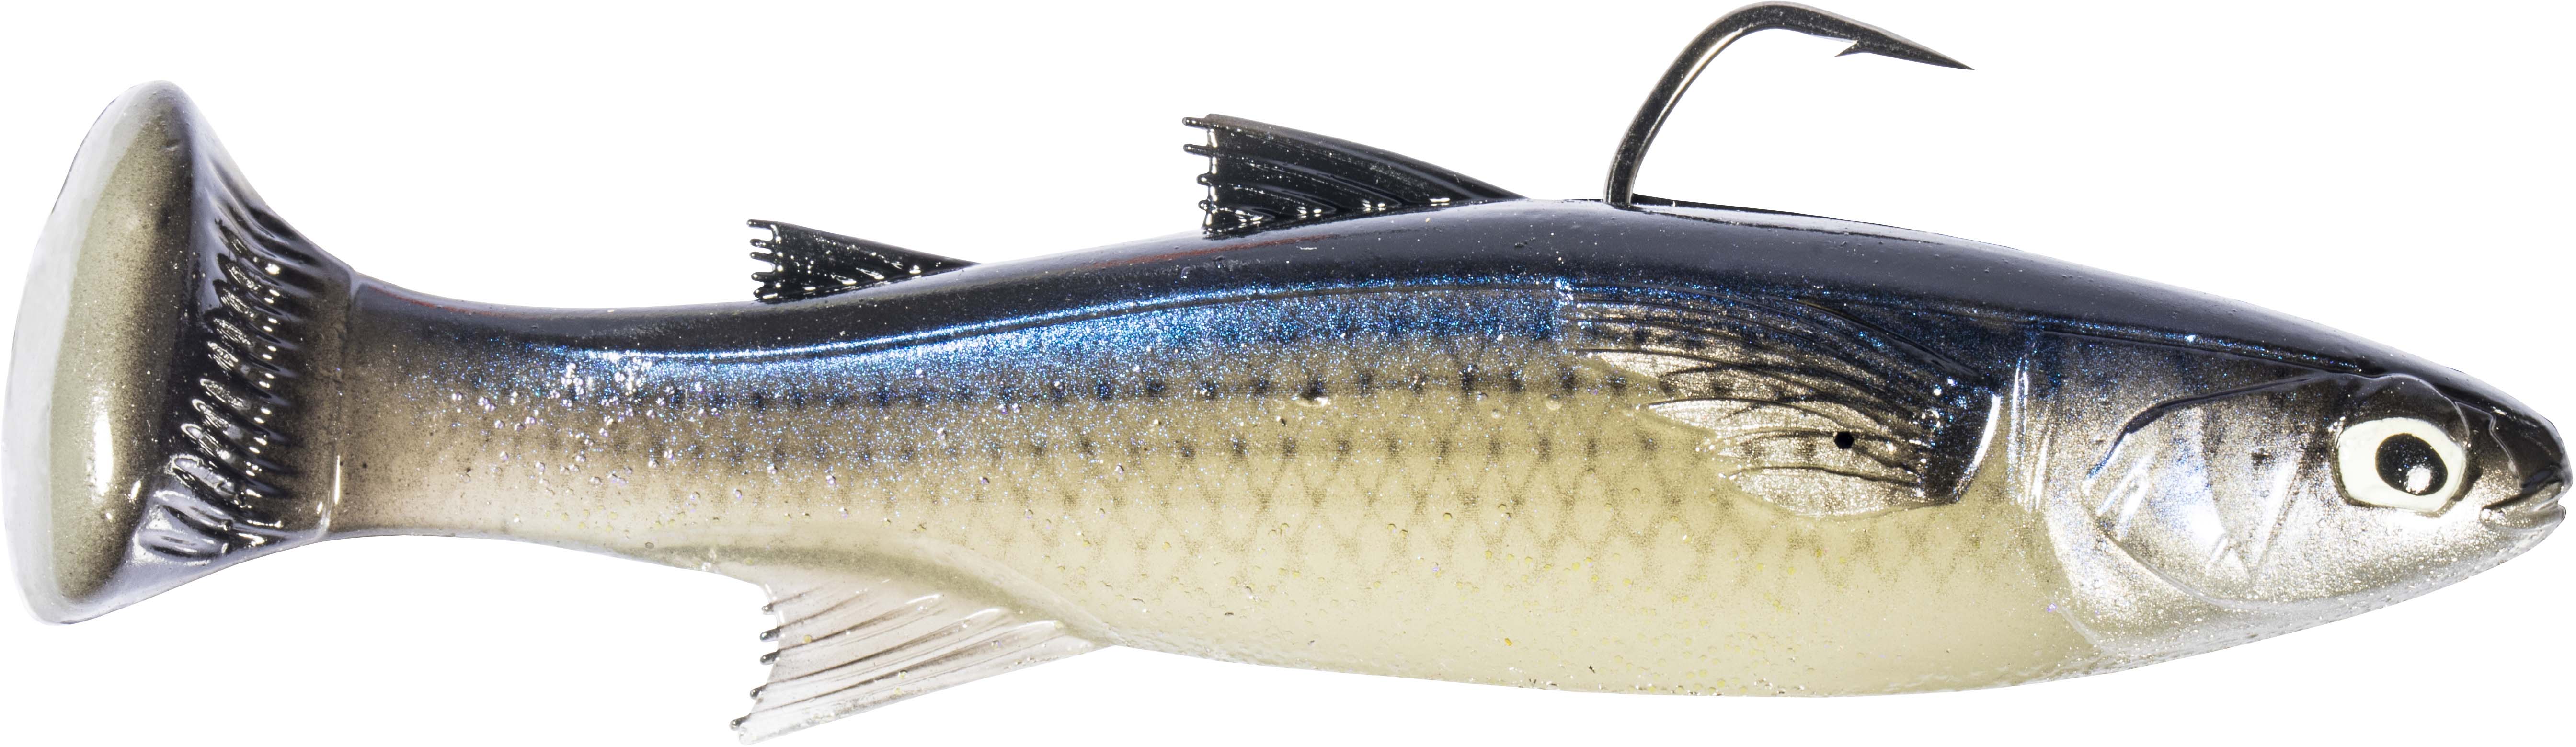 Swimbait or Creature bait? What's - Z-Man Fishing Products